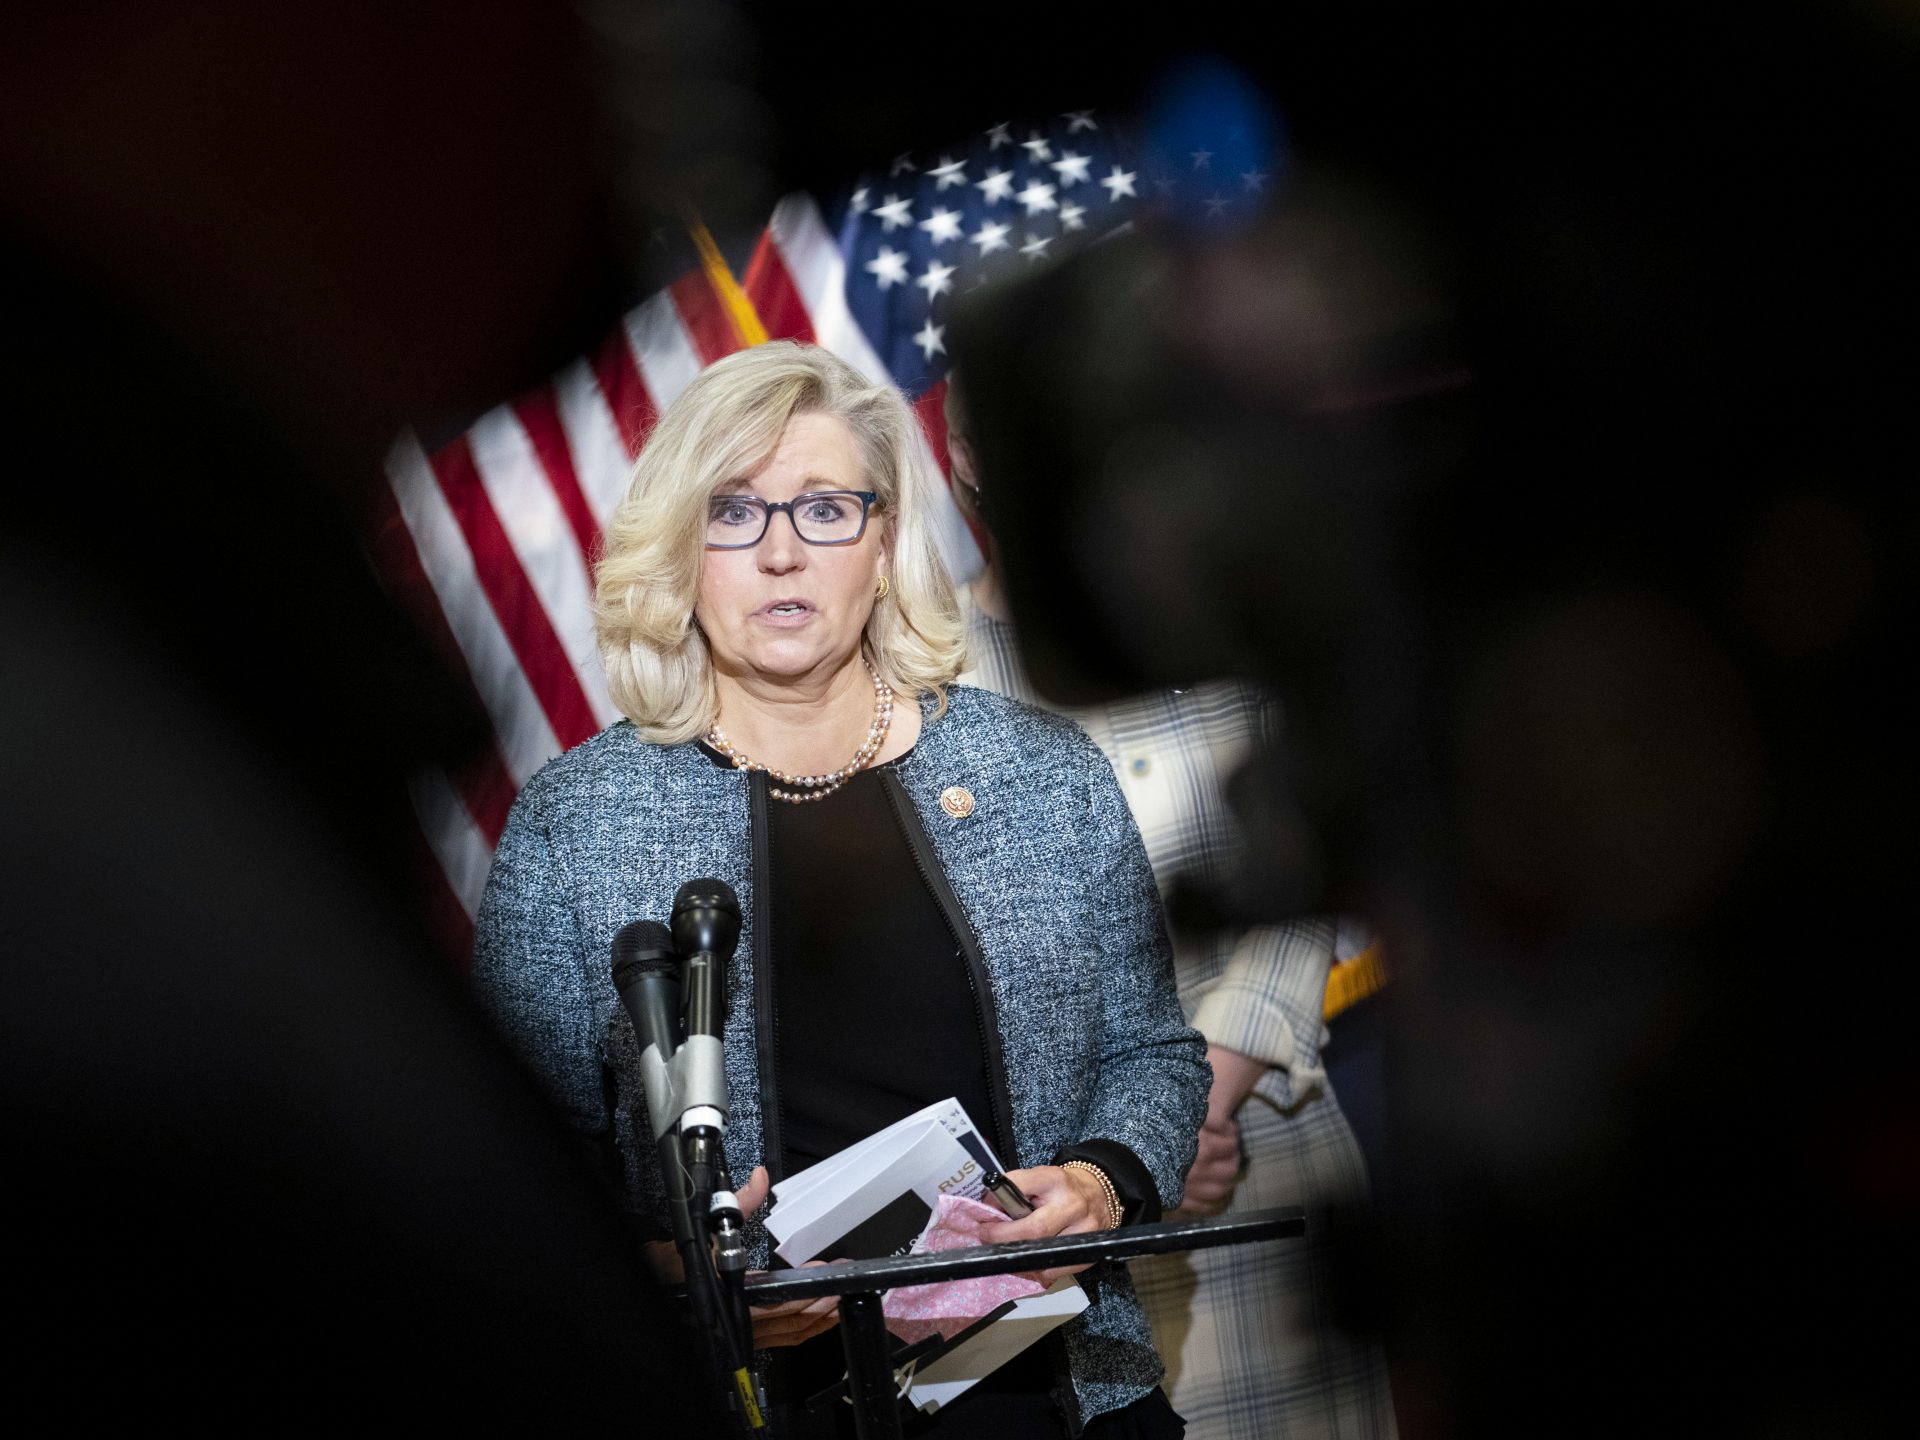 Support for Rep. Liz Cheney, seen here on April 20, is crumbling as the second-ranking House Republican is publicly supporting her ousting from GOP leadership.